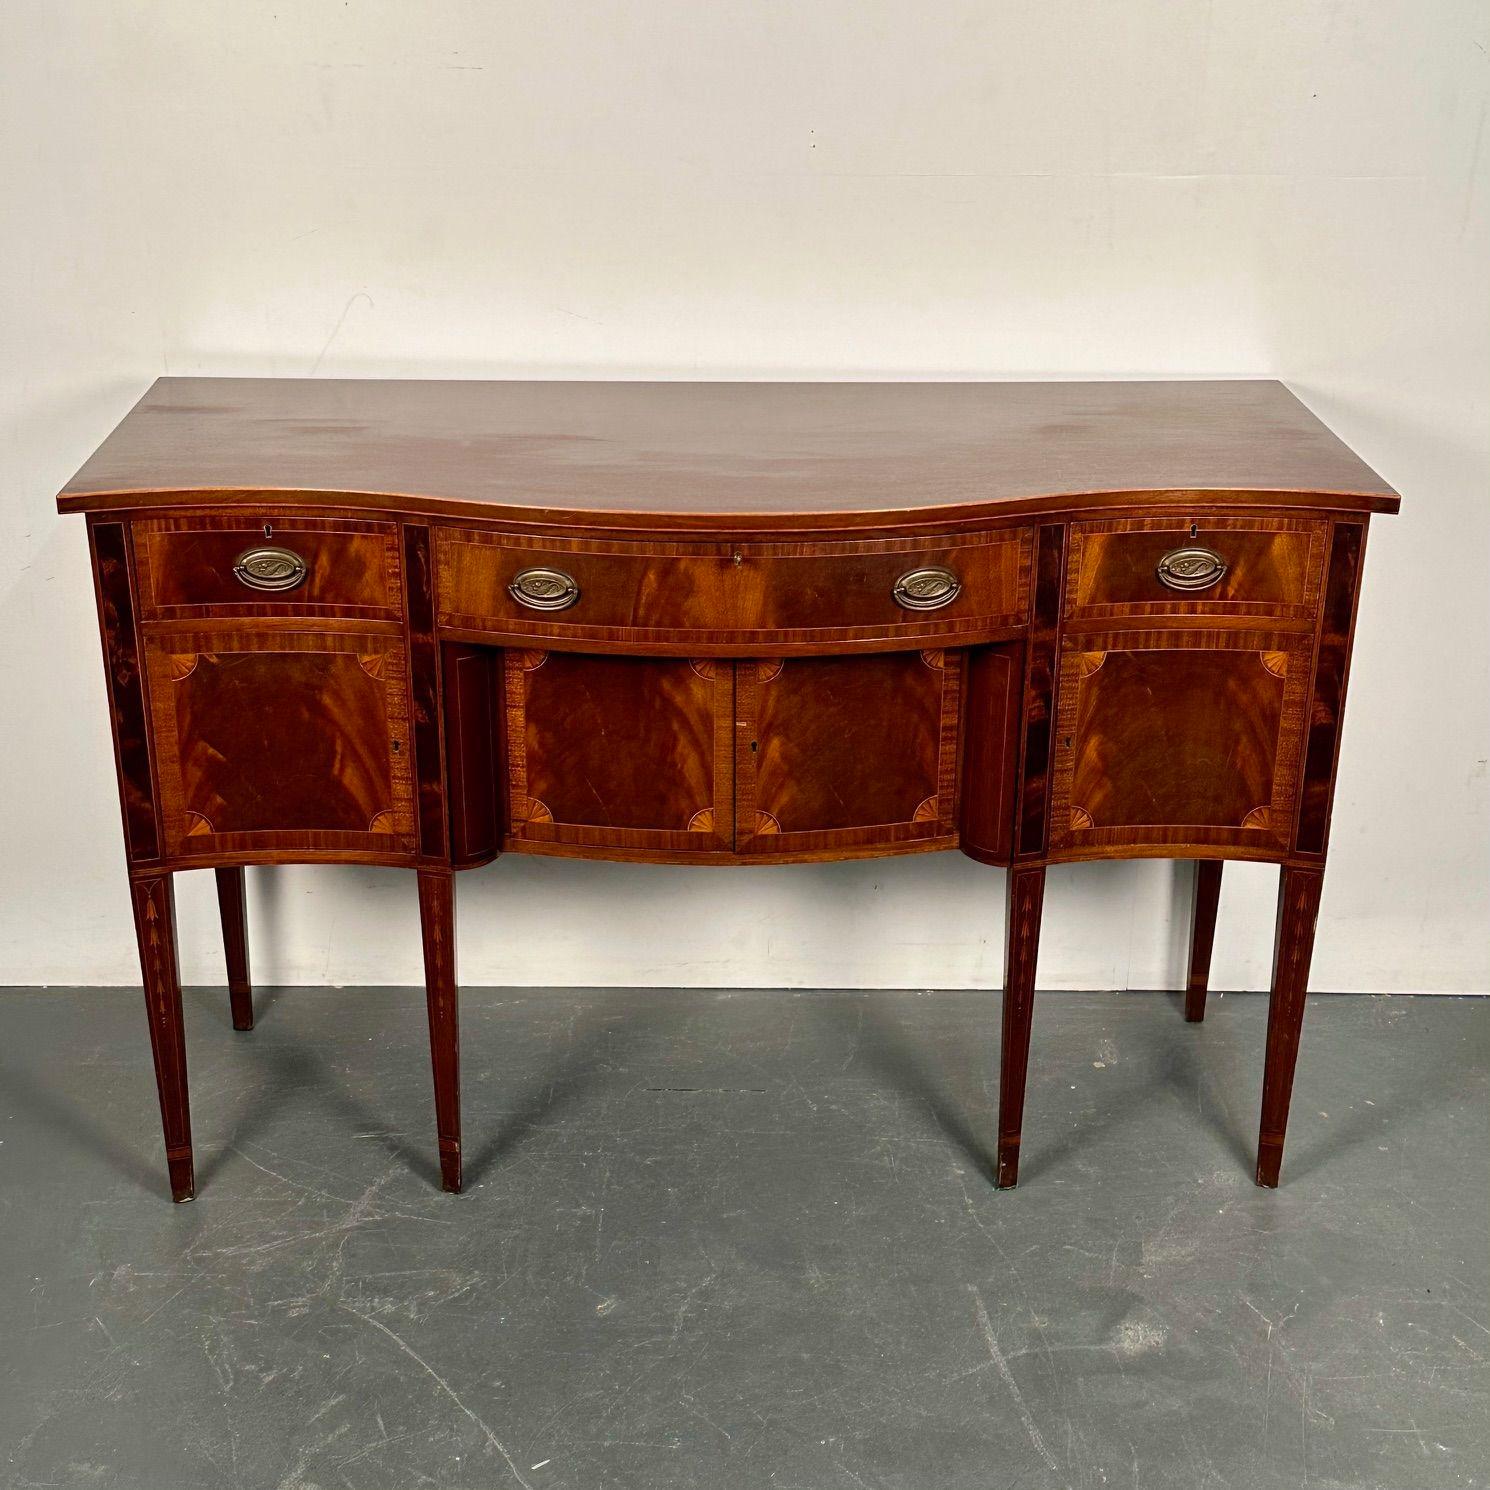 Georgian Style Hepplewhite Mahogany Sideboard by Cabinetmaker W.J. Barry with original documentation

A serpentine front flame mahogany and satinwood inlaid sideboard circa 1930 in its original condition. All the bells and whistles on this